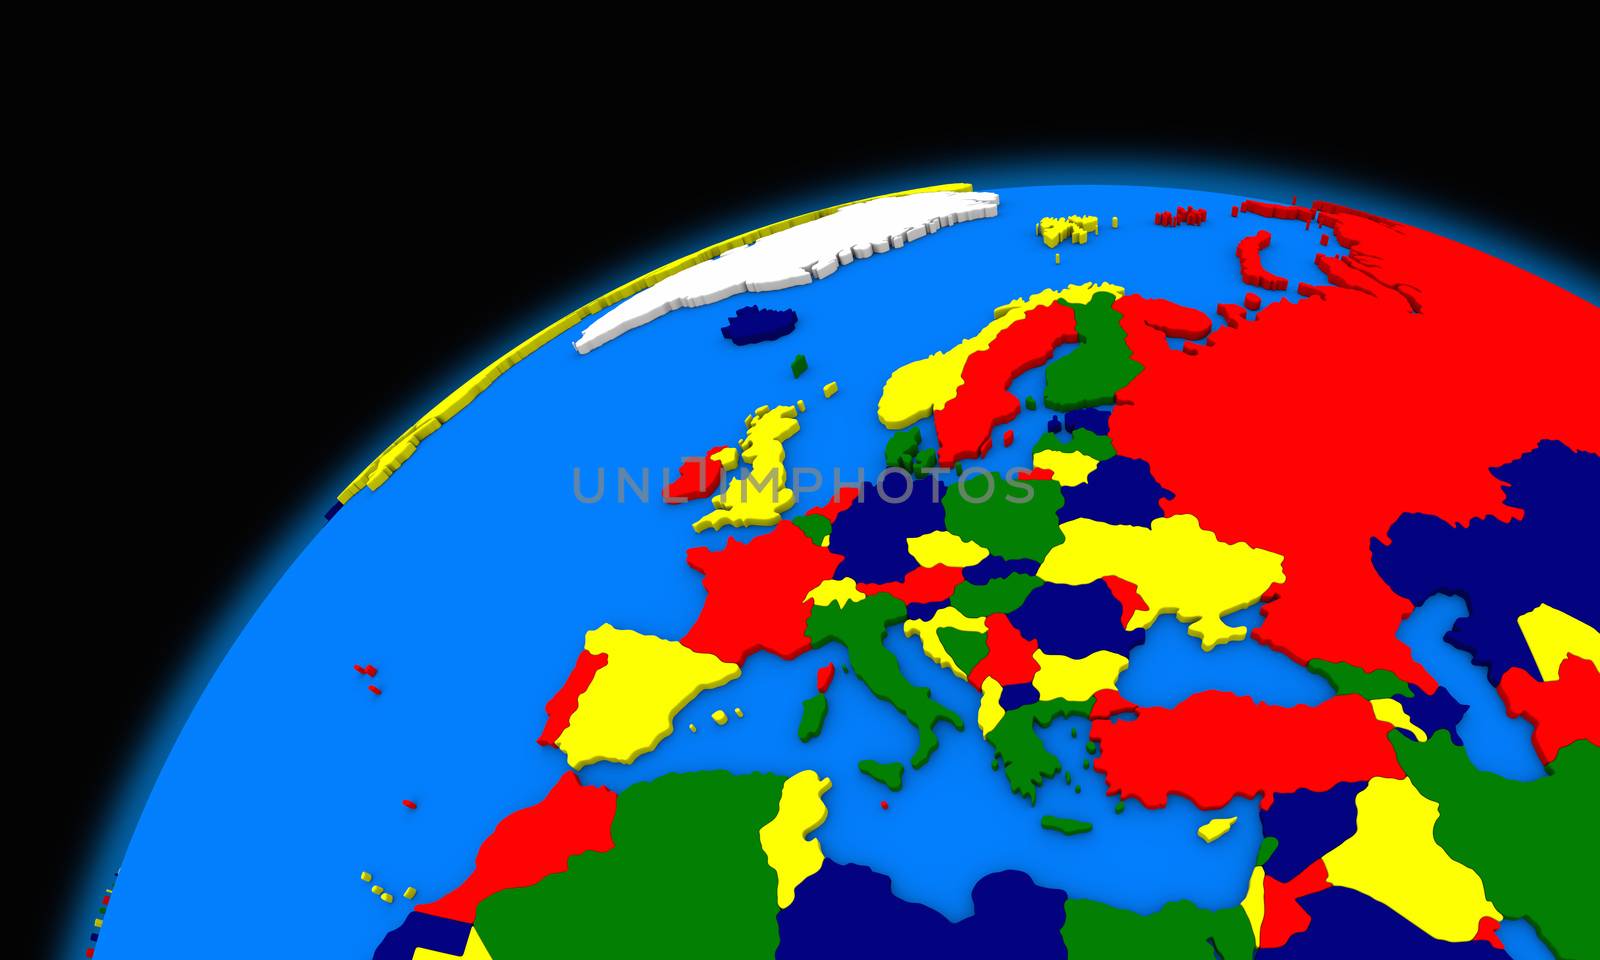 Europe on planet Earth political map by Harvepino